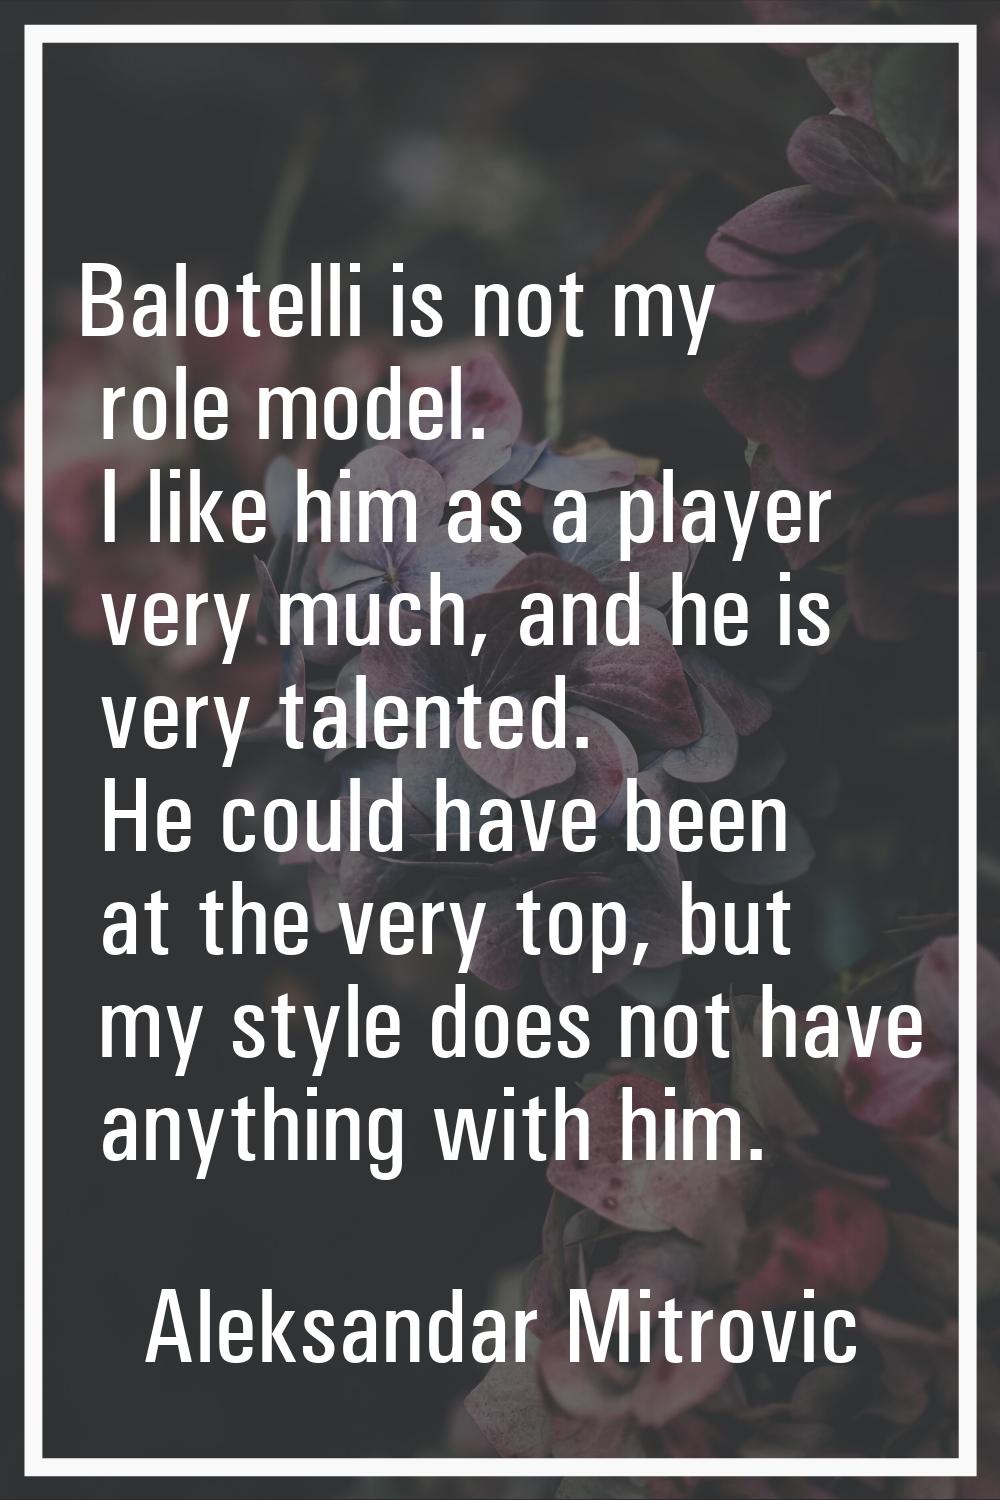 Balotelli is not my role model. I like him as a player very much, and he is very talented. He could